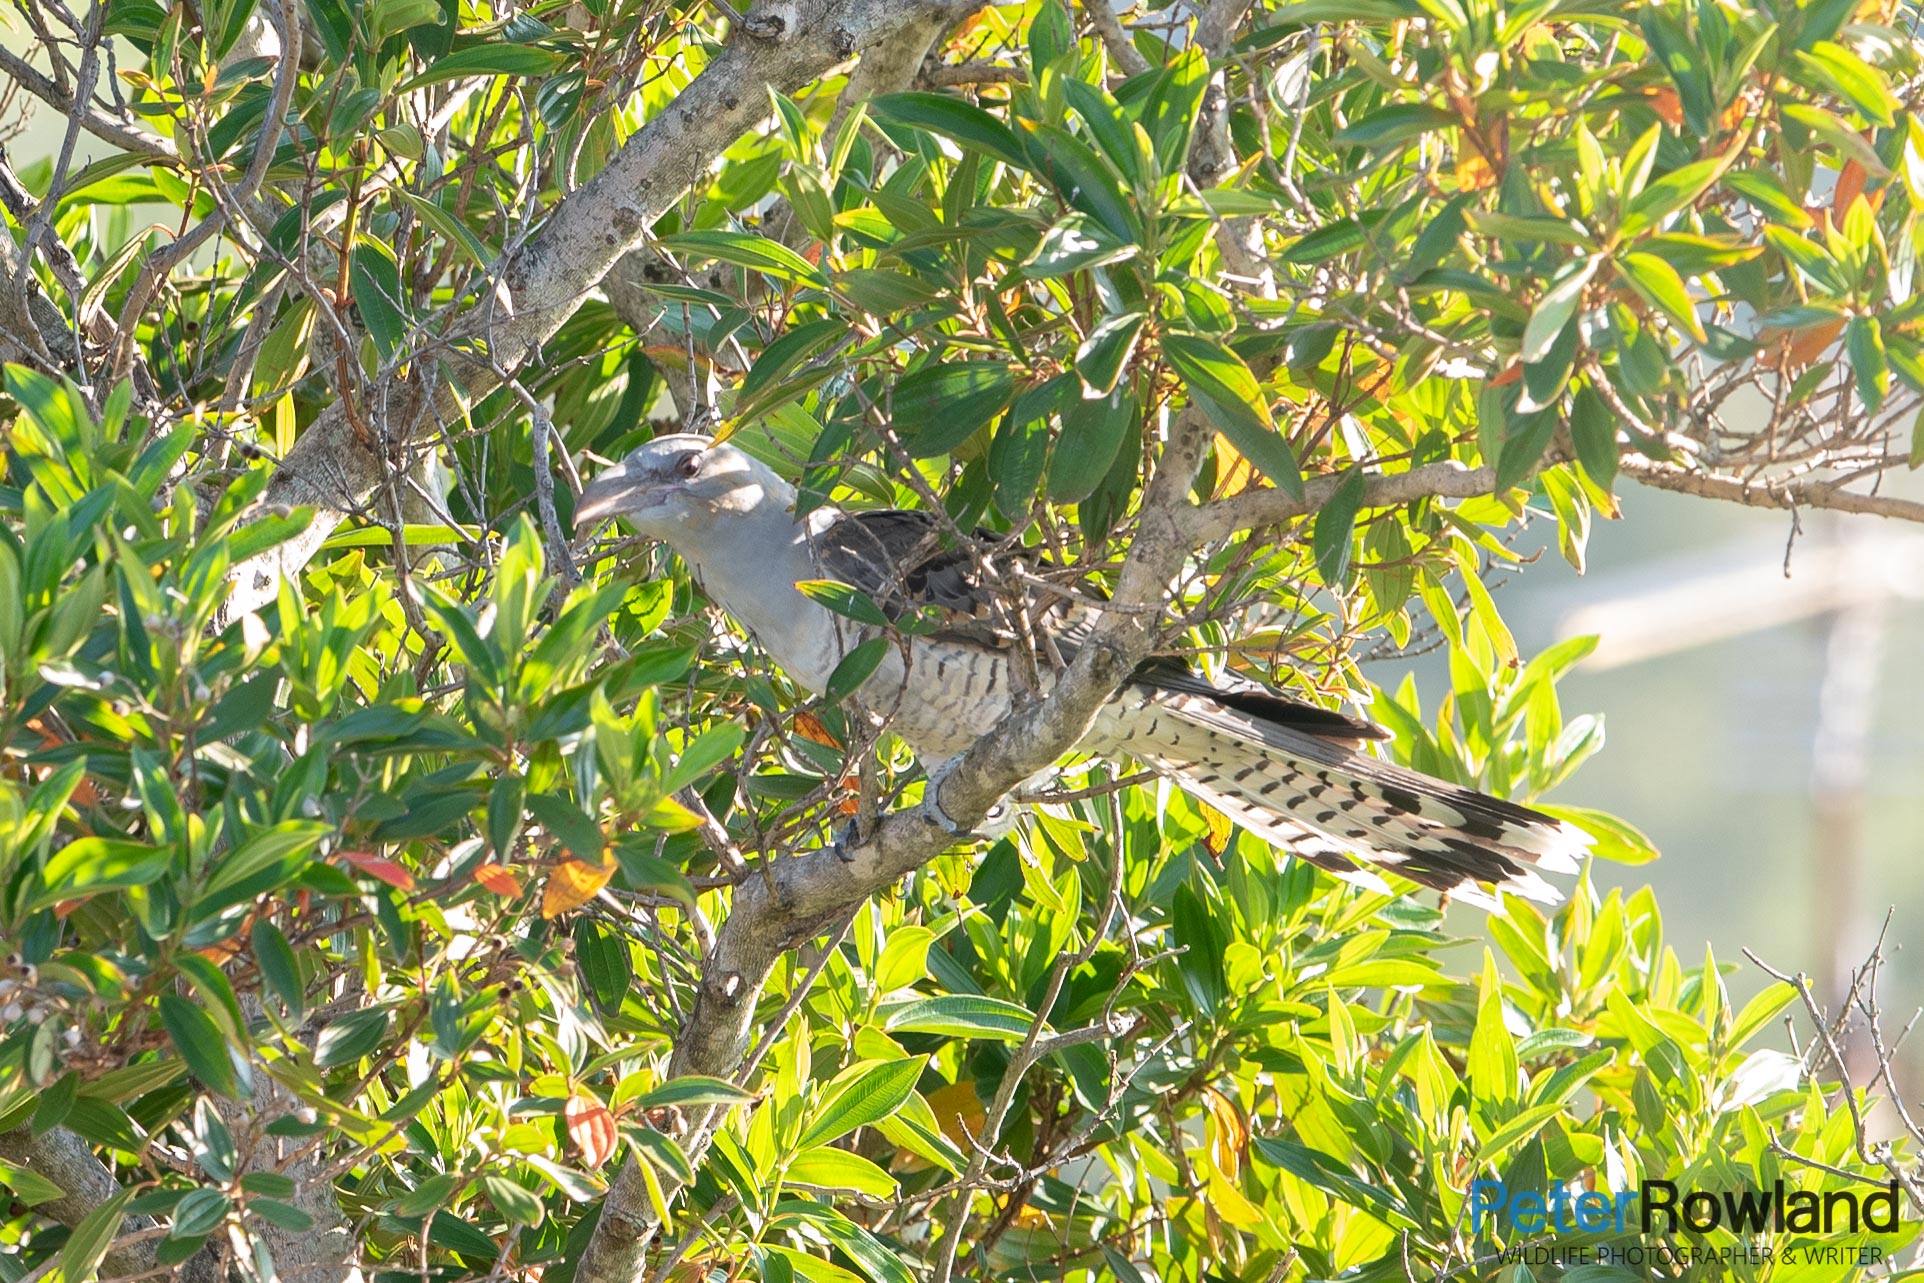 A young Channel-billed Cuckoo perched in a tree